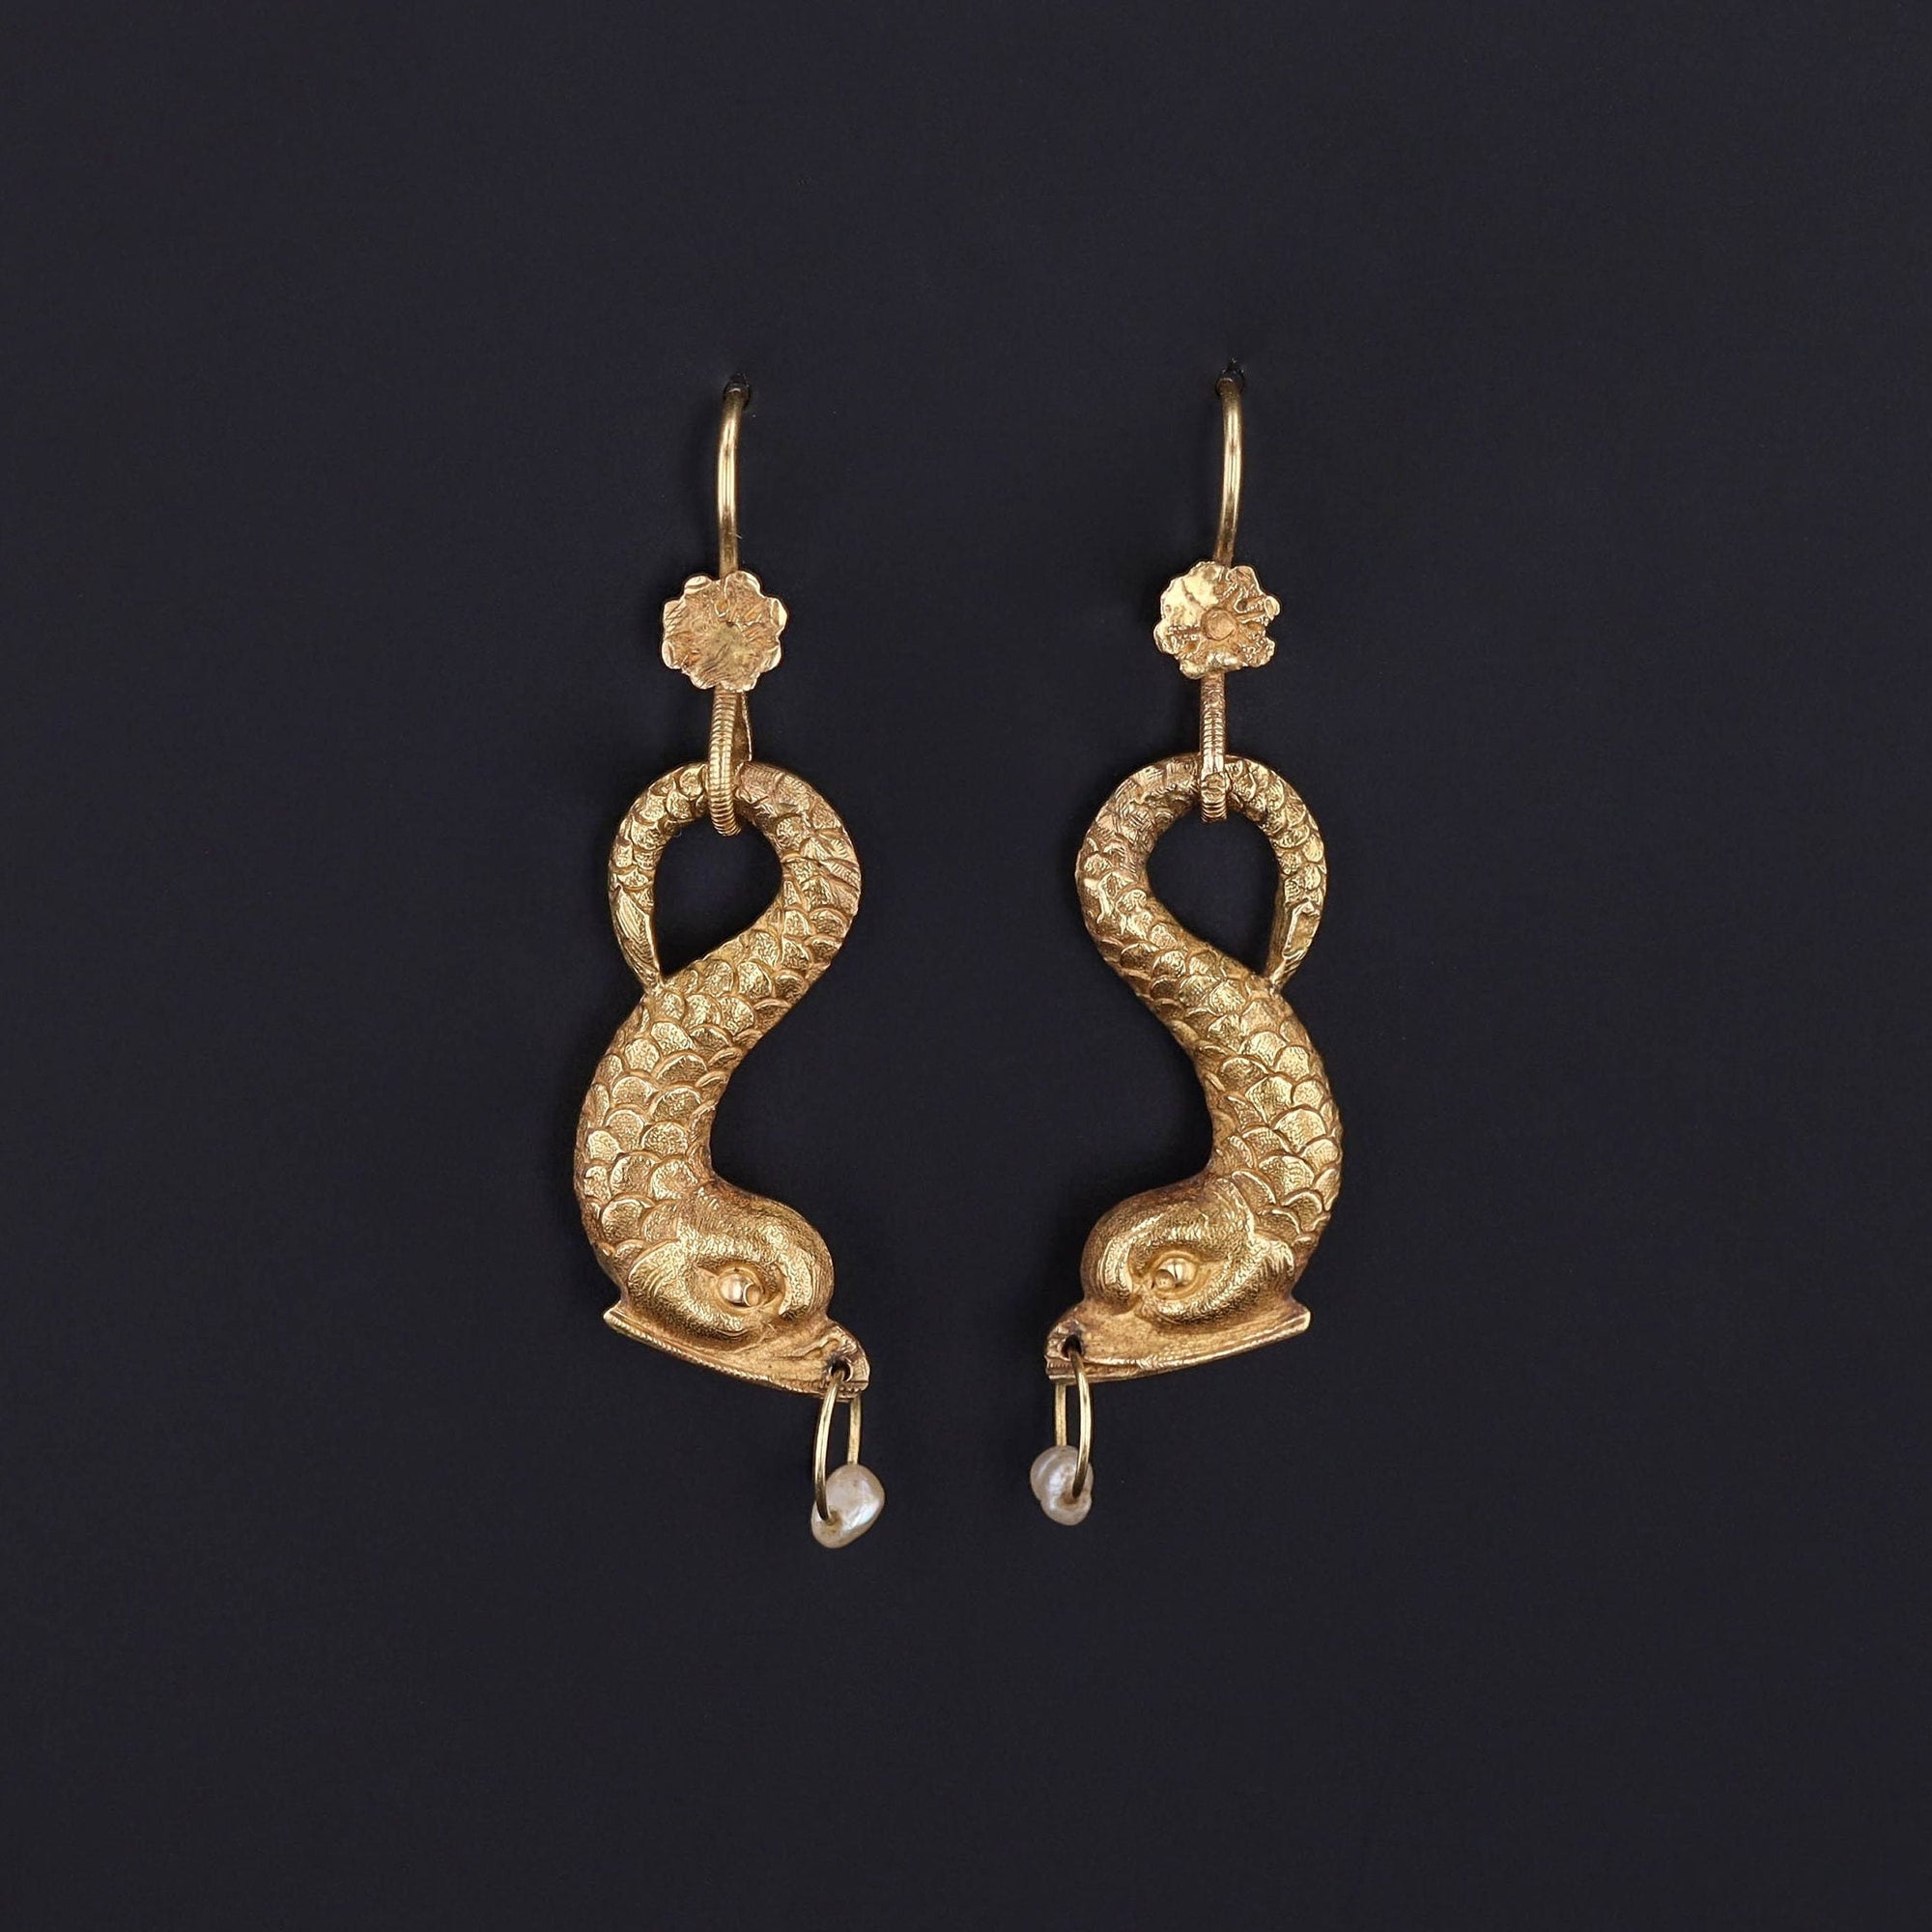 Vintage Fish with Pearl Earrings of 18k Gold